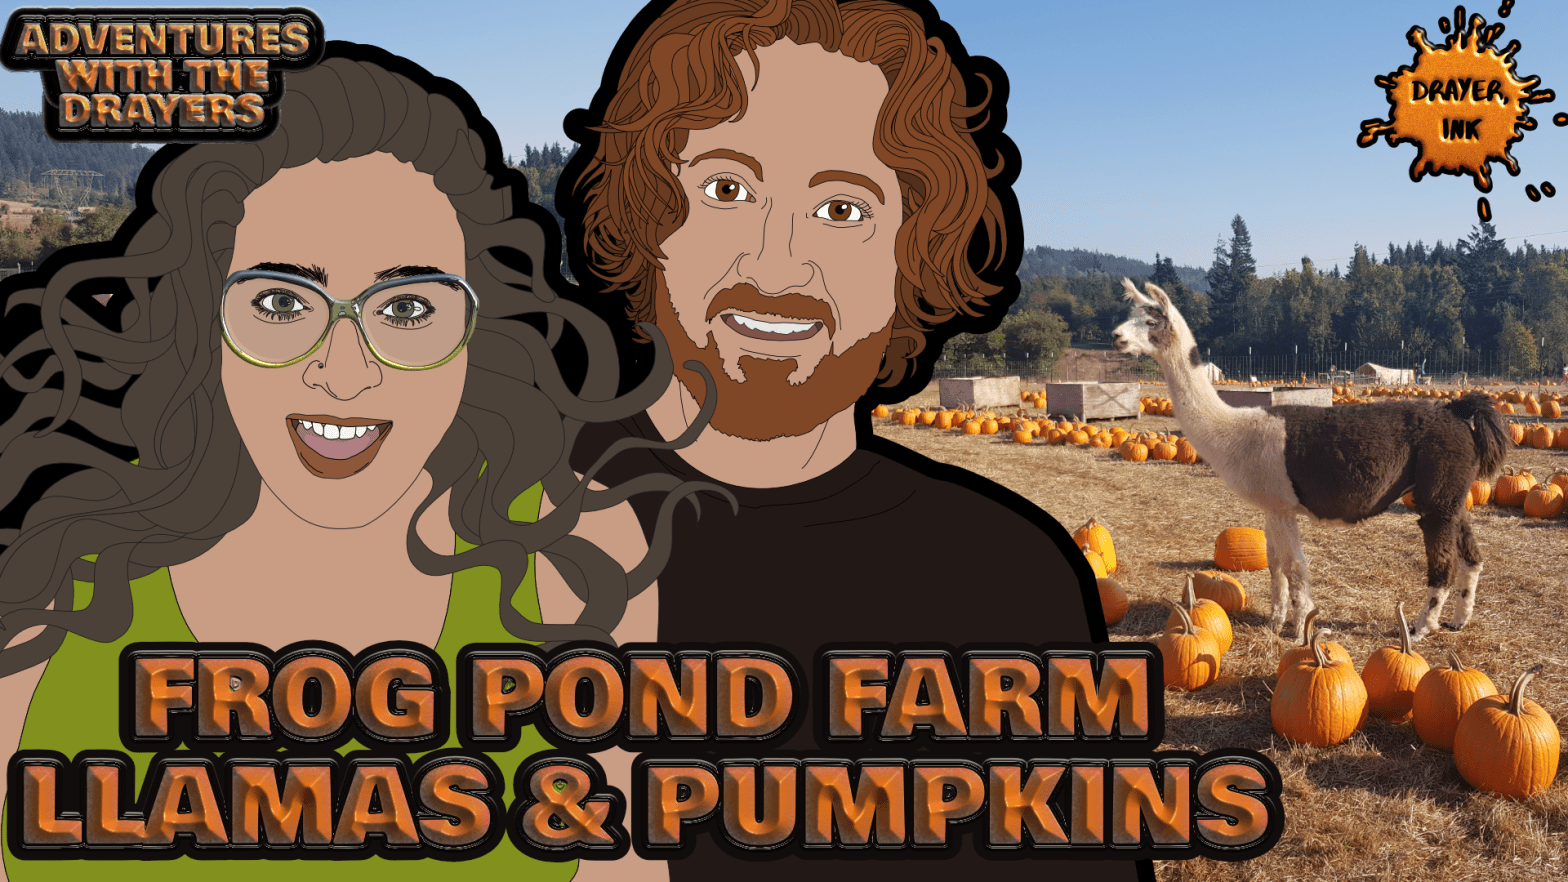 Adventures with the Drayers – Frog Pond Farm